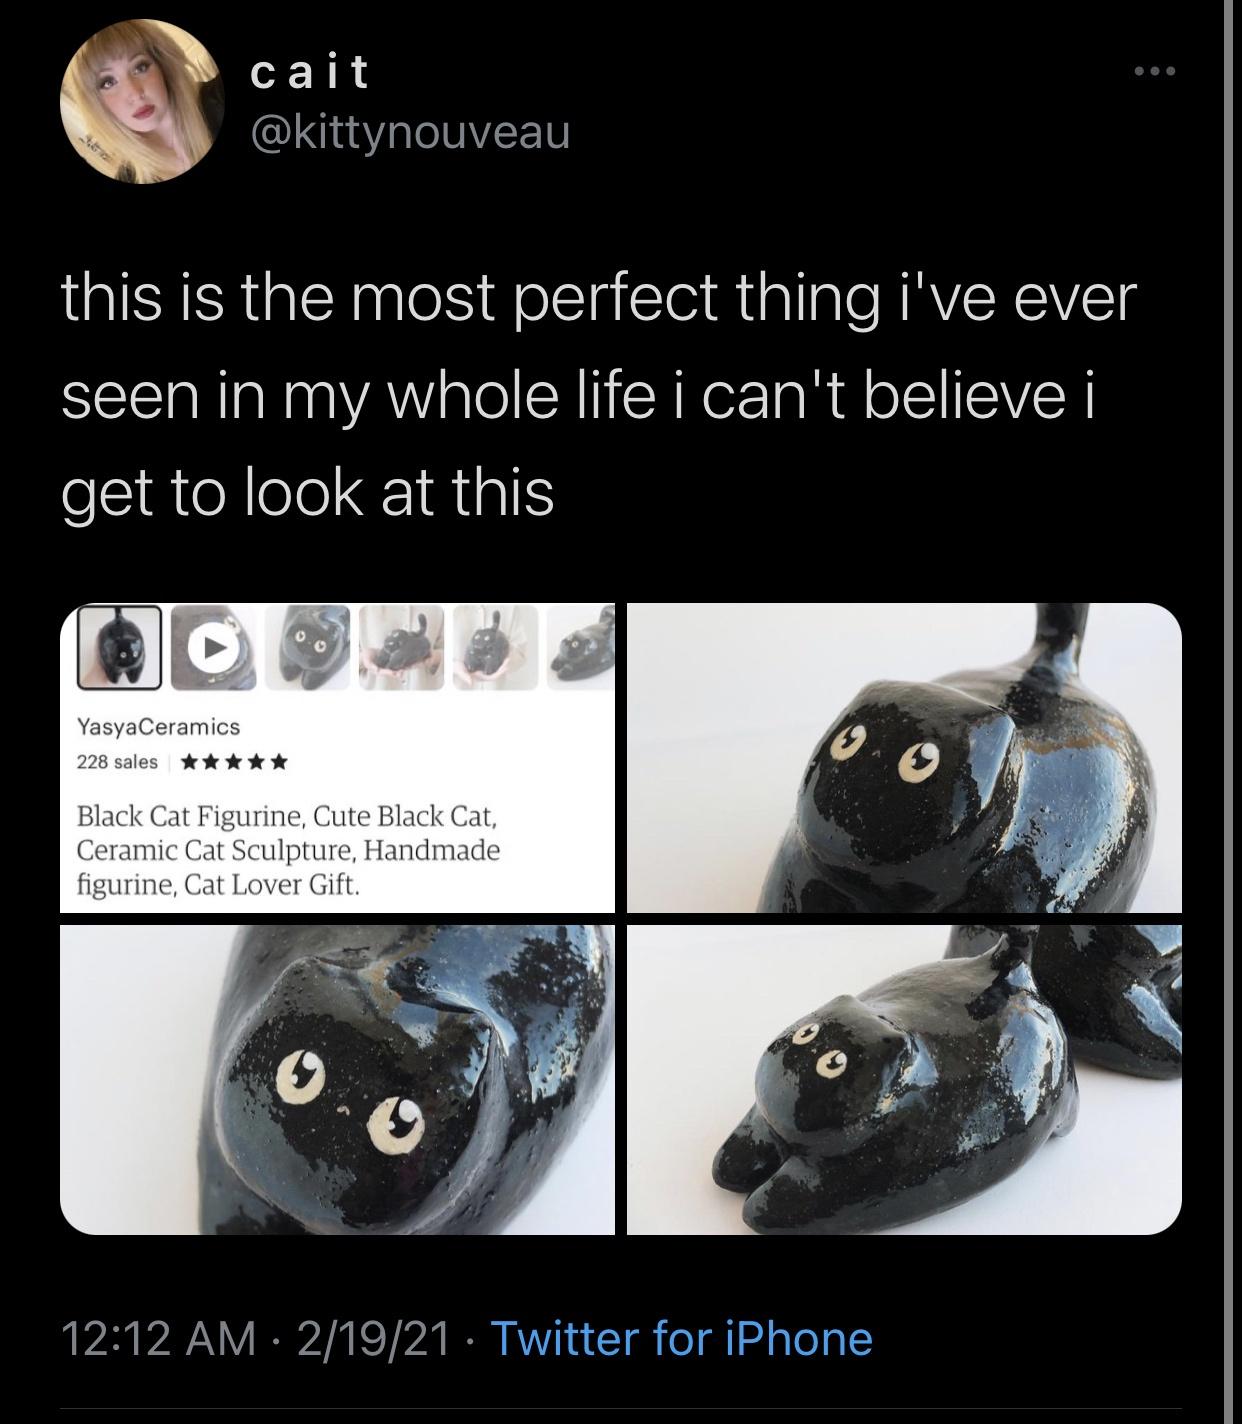 photo caption - cait this is the most perfect thing i've ever seen in my whole life i can't believe i get to look at this YasyaCeramics 228 sales ttttt Black Cat Figurine, Cute Black Cat, Ceramic Cat Sculpture, Handmade figurine, Cat Lover Gift. 21921 Twi